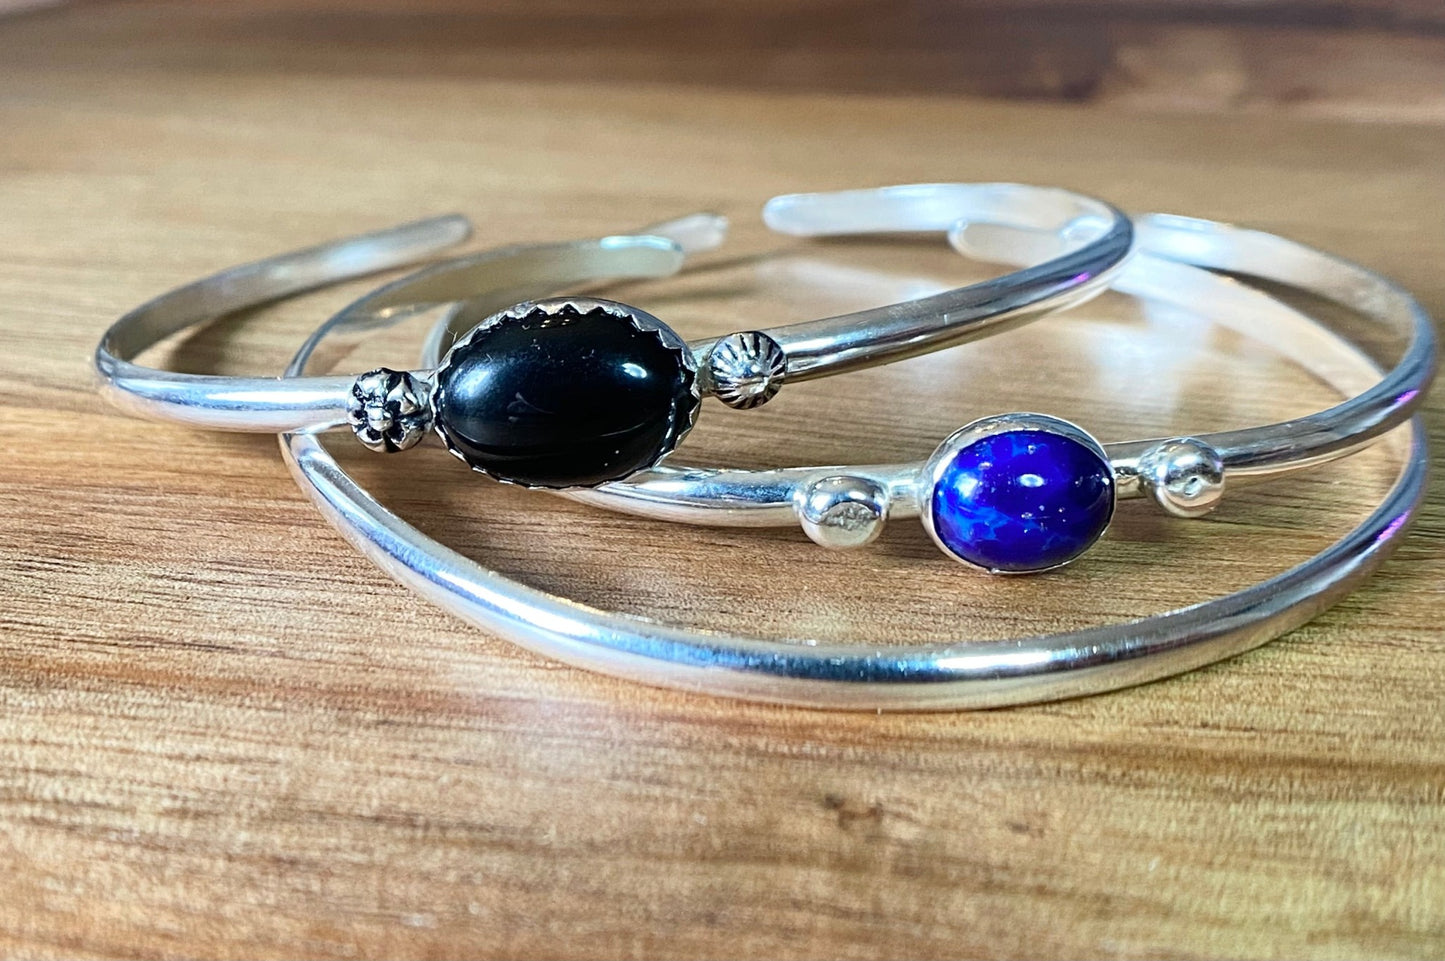 Stacakble cuffs with onyx, lapis or just a plain bracelet. Ornate pieces of silver dot the pieces as well as a oval stone.